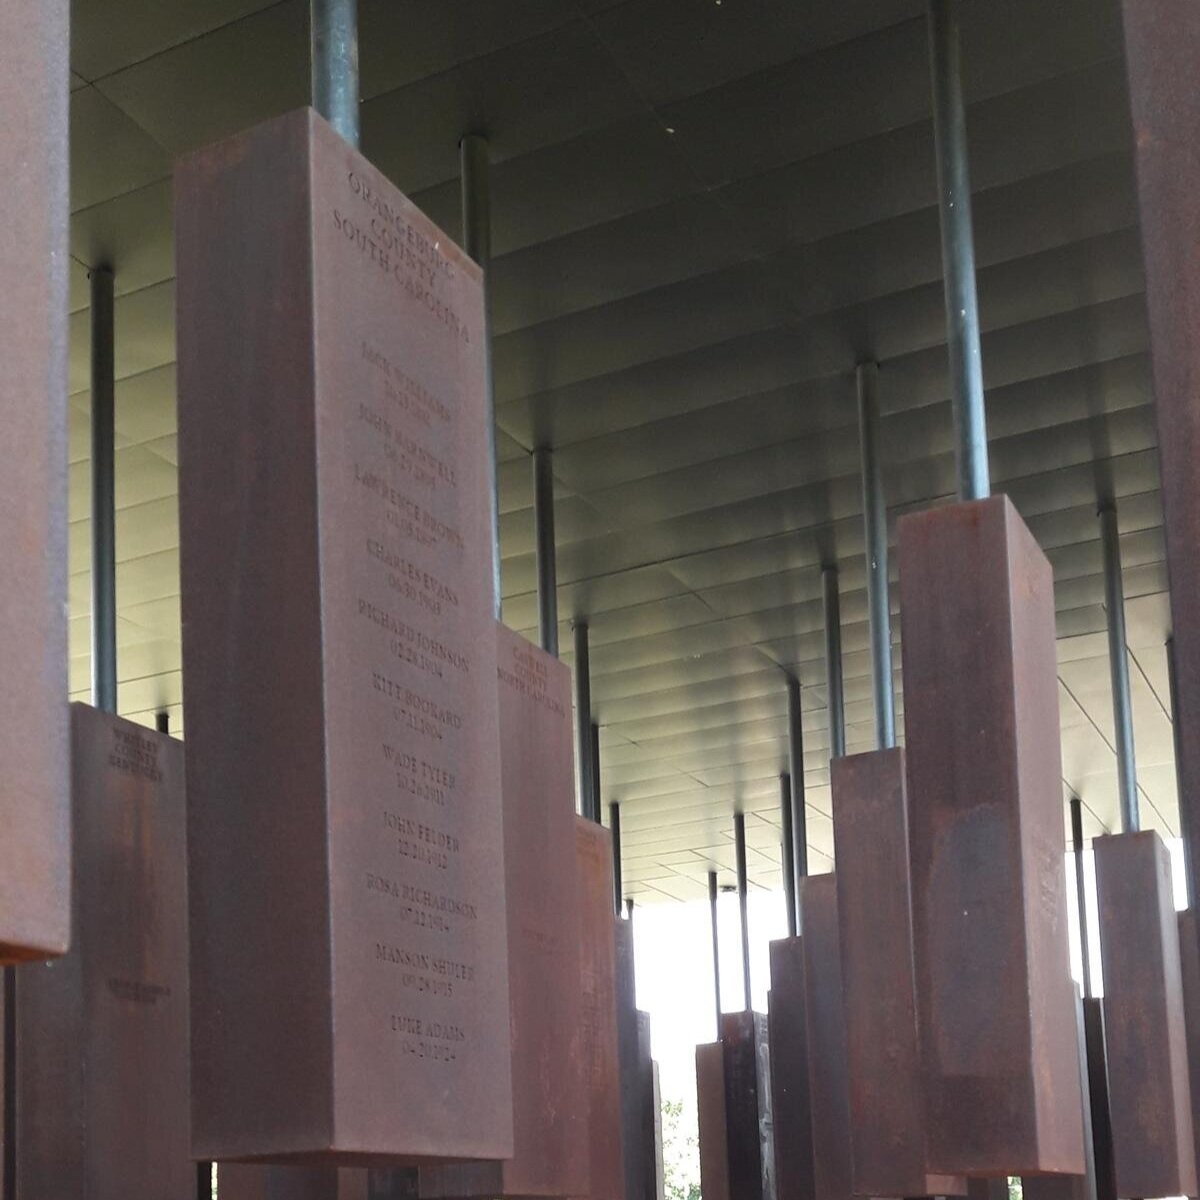 Inside the Memorial, hanging columns with the county, names and dates of those lynched